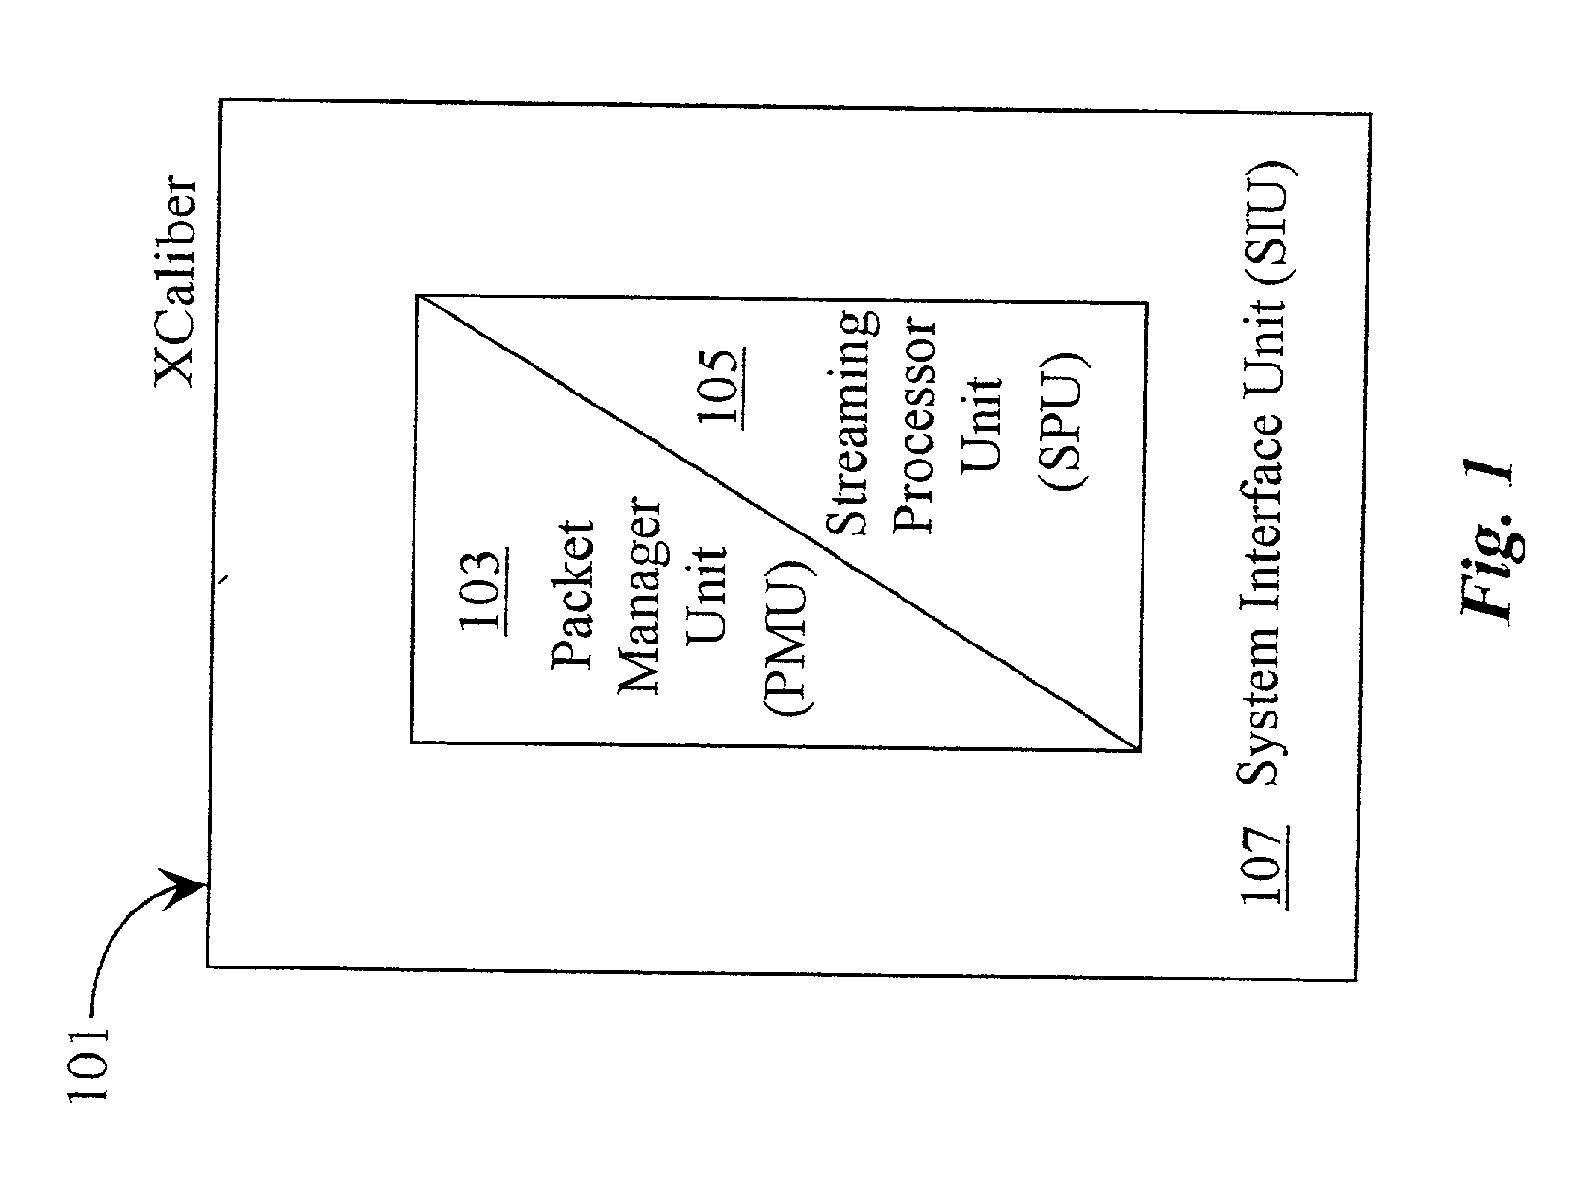 Context Sharing Between A Streaming Processing Unit (SPU) and A Packet Management Unit (PMU) In A Packet Processing Environment